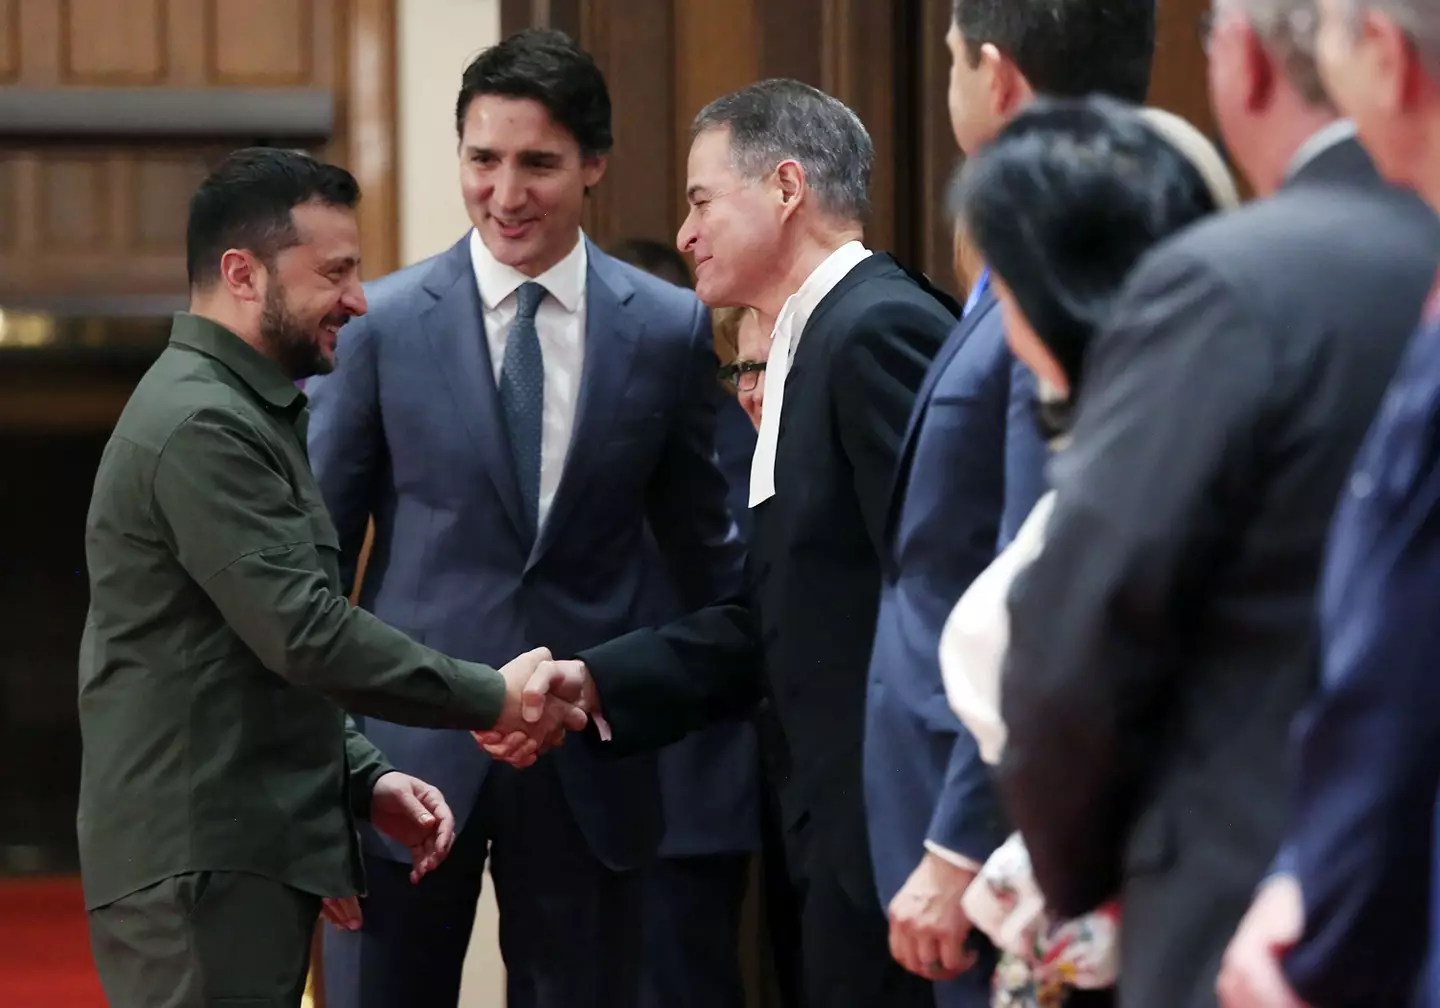 Ukrainian President Volodymyr Zelensky with Canadian Prime Minister Justin Trudeau shaking hands with House of Commons Speaker Anthony Rota.